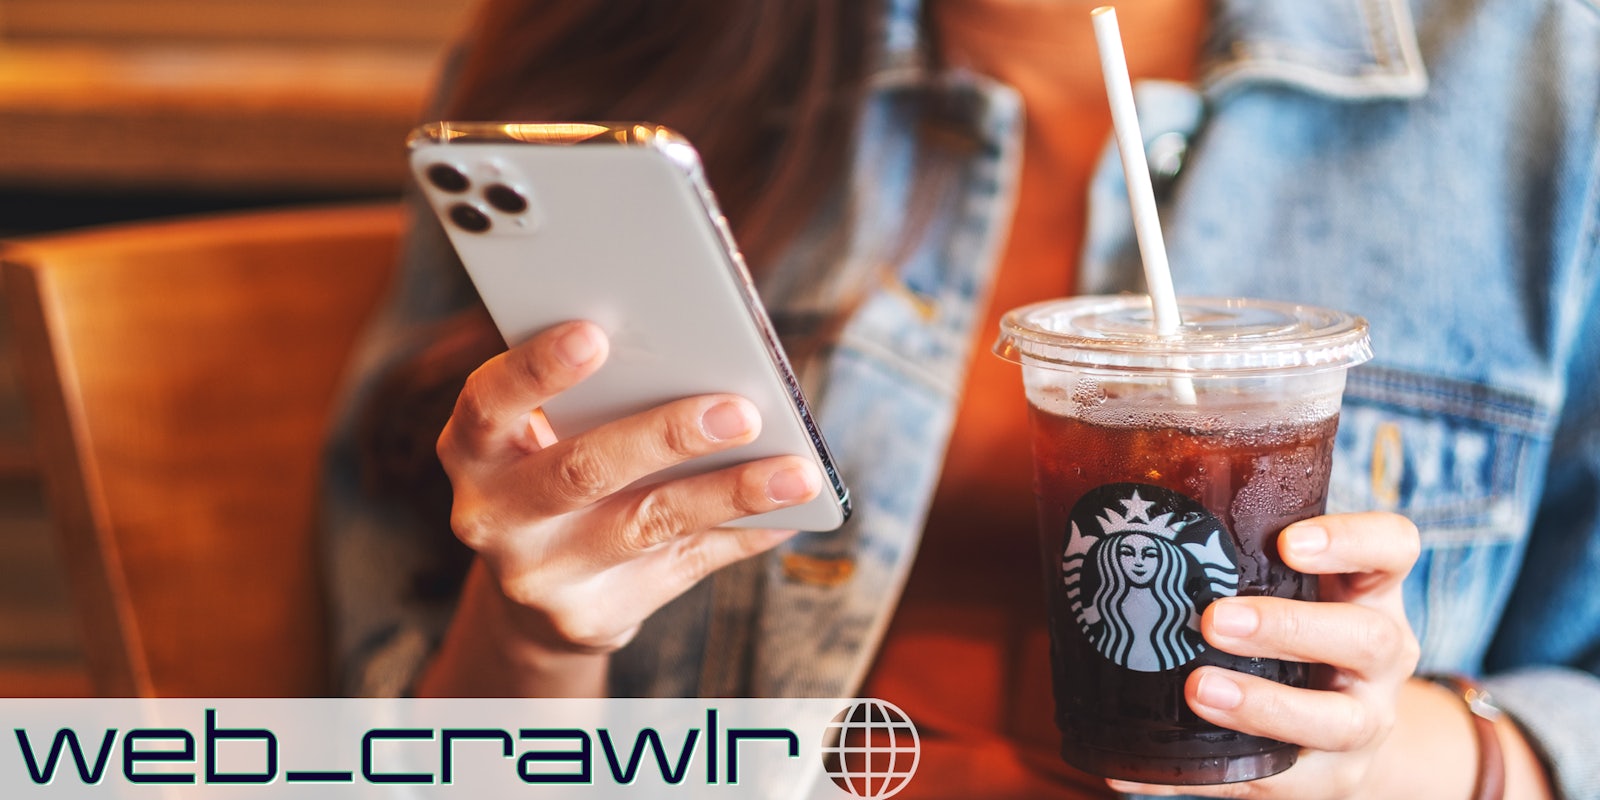 A person holding a smartphone and Starbucks coffee. The Daily Dot newsletter web_crawlr logo is in the bottom left corner.